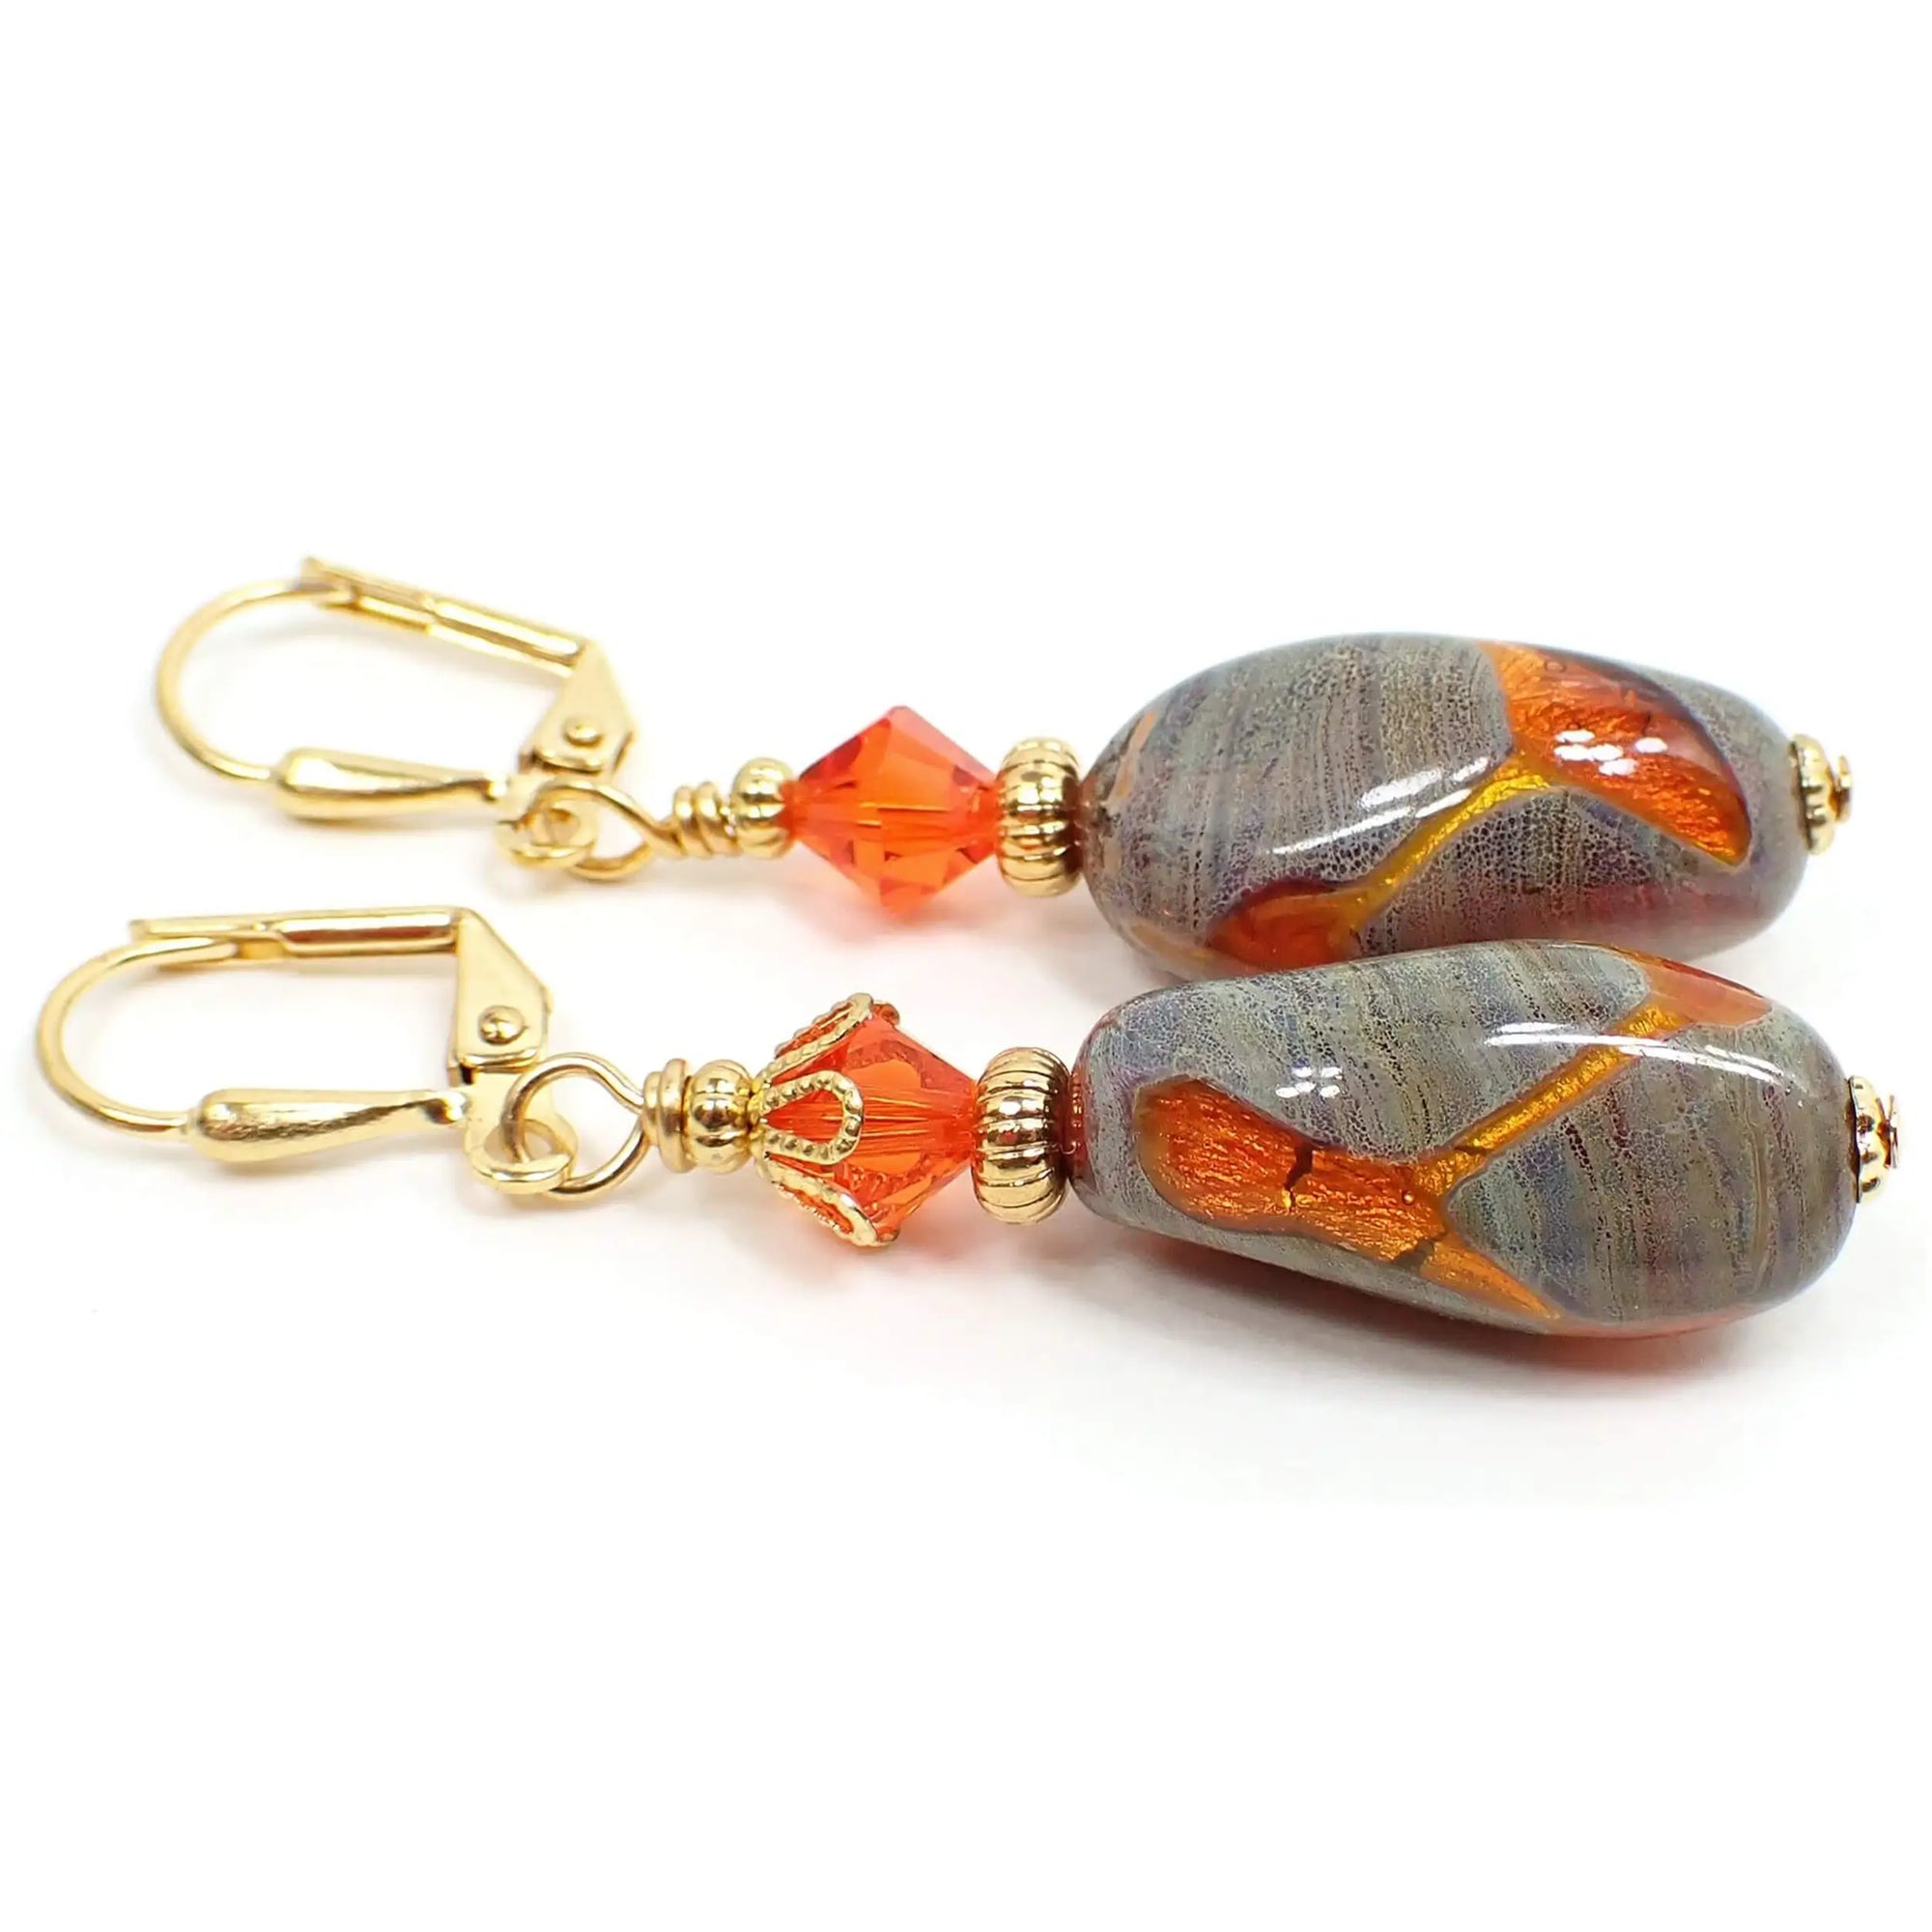 Side view of the handmade drop earrings with reclaimed vintage acrylic beads. The metal is gold plated in color. There are new bright orange faceted glass crystal beads at the top. The bottom vintage beads are acrylic and have a faux stone like appearance that is shades of green with lines. There are areas of bright orange in various places on the beads. Each bead is different than the other in the orange patterns.